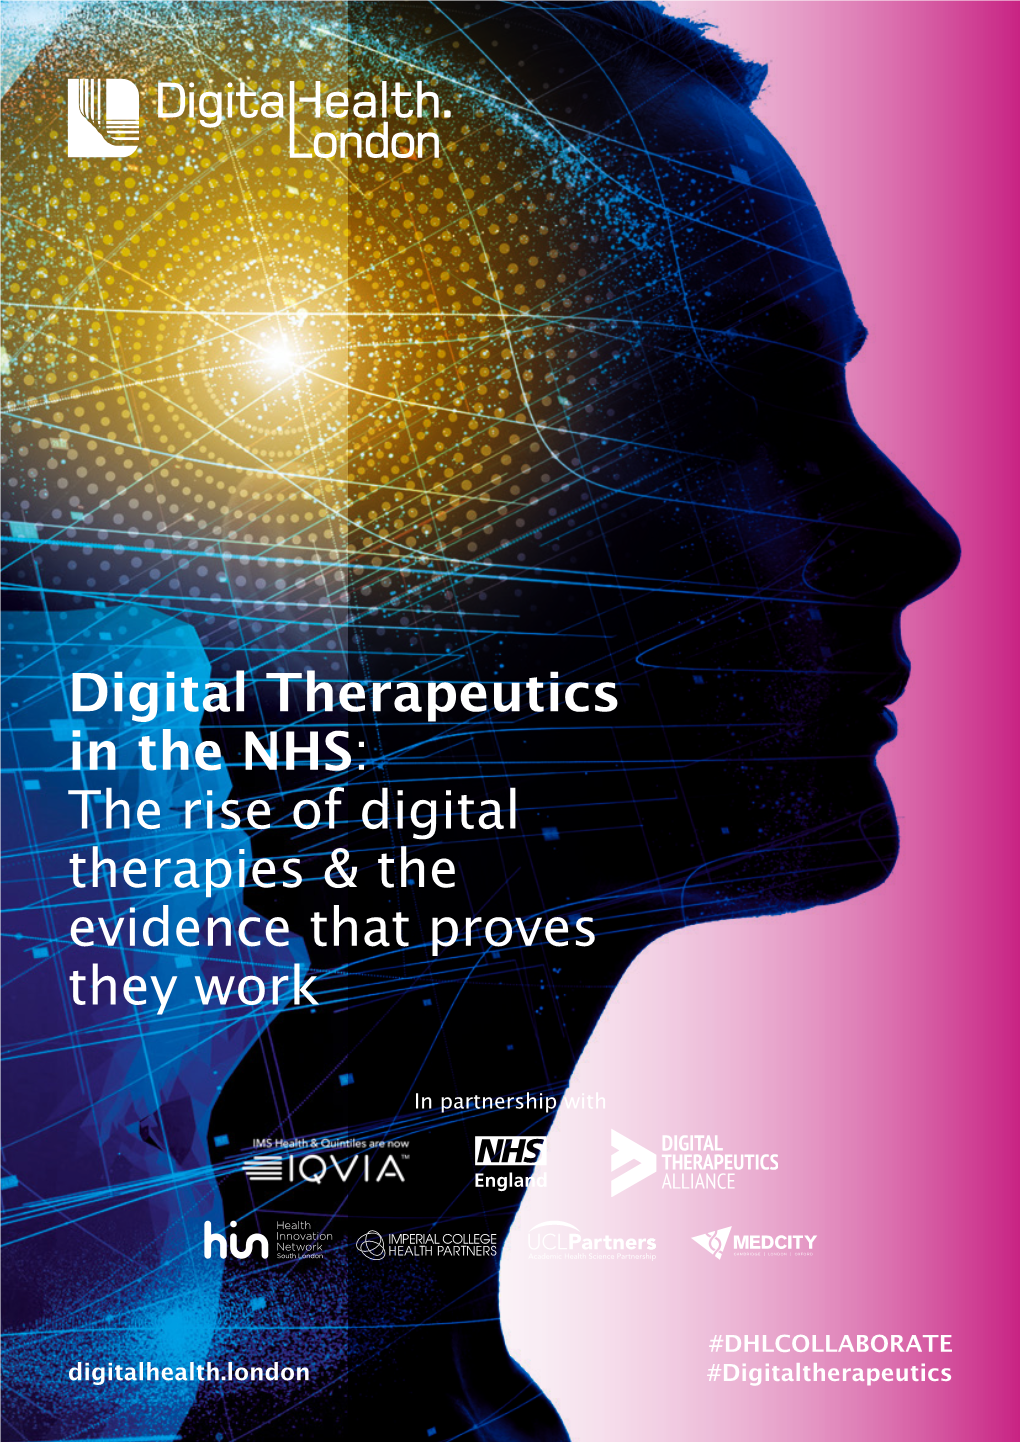 Digital Therapeutics in the NHS: the Rise of Digital Therapies & The